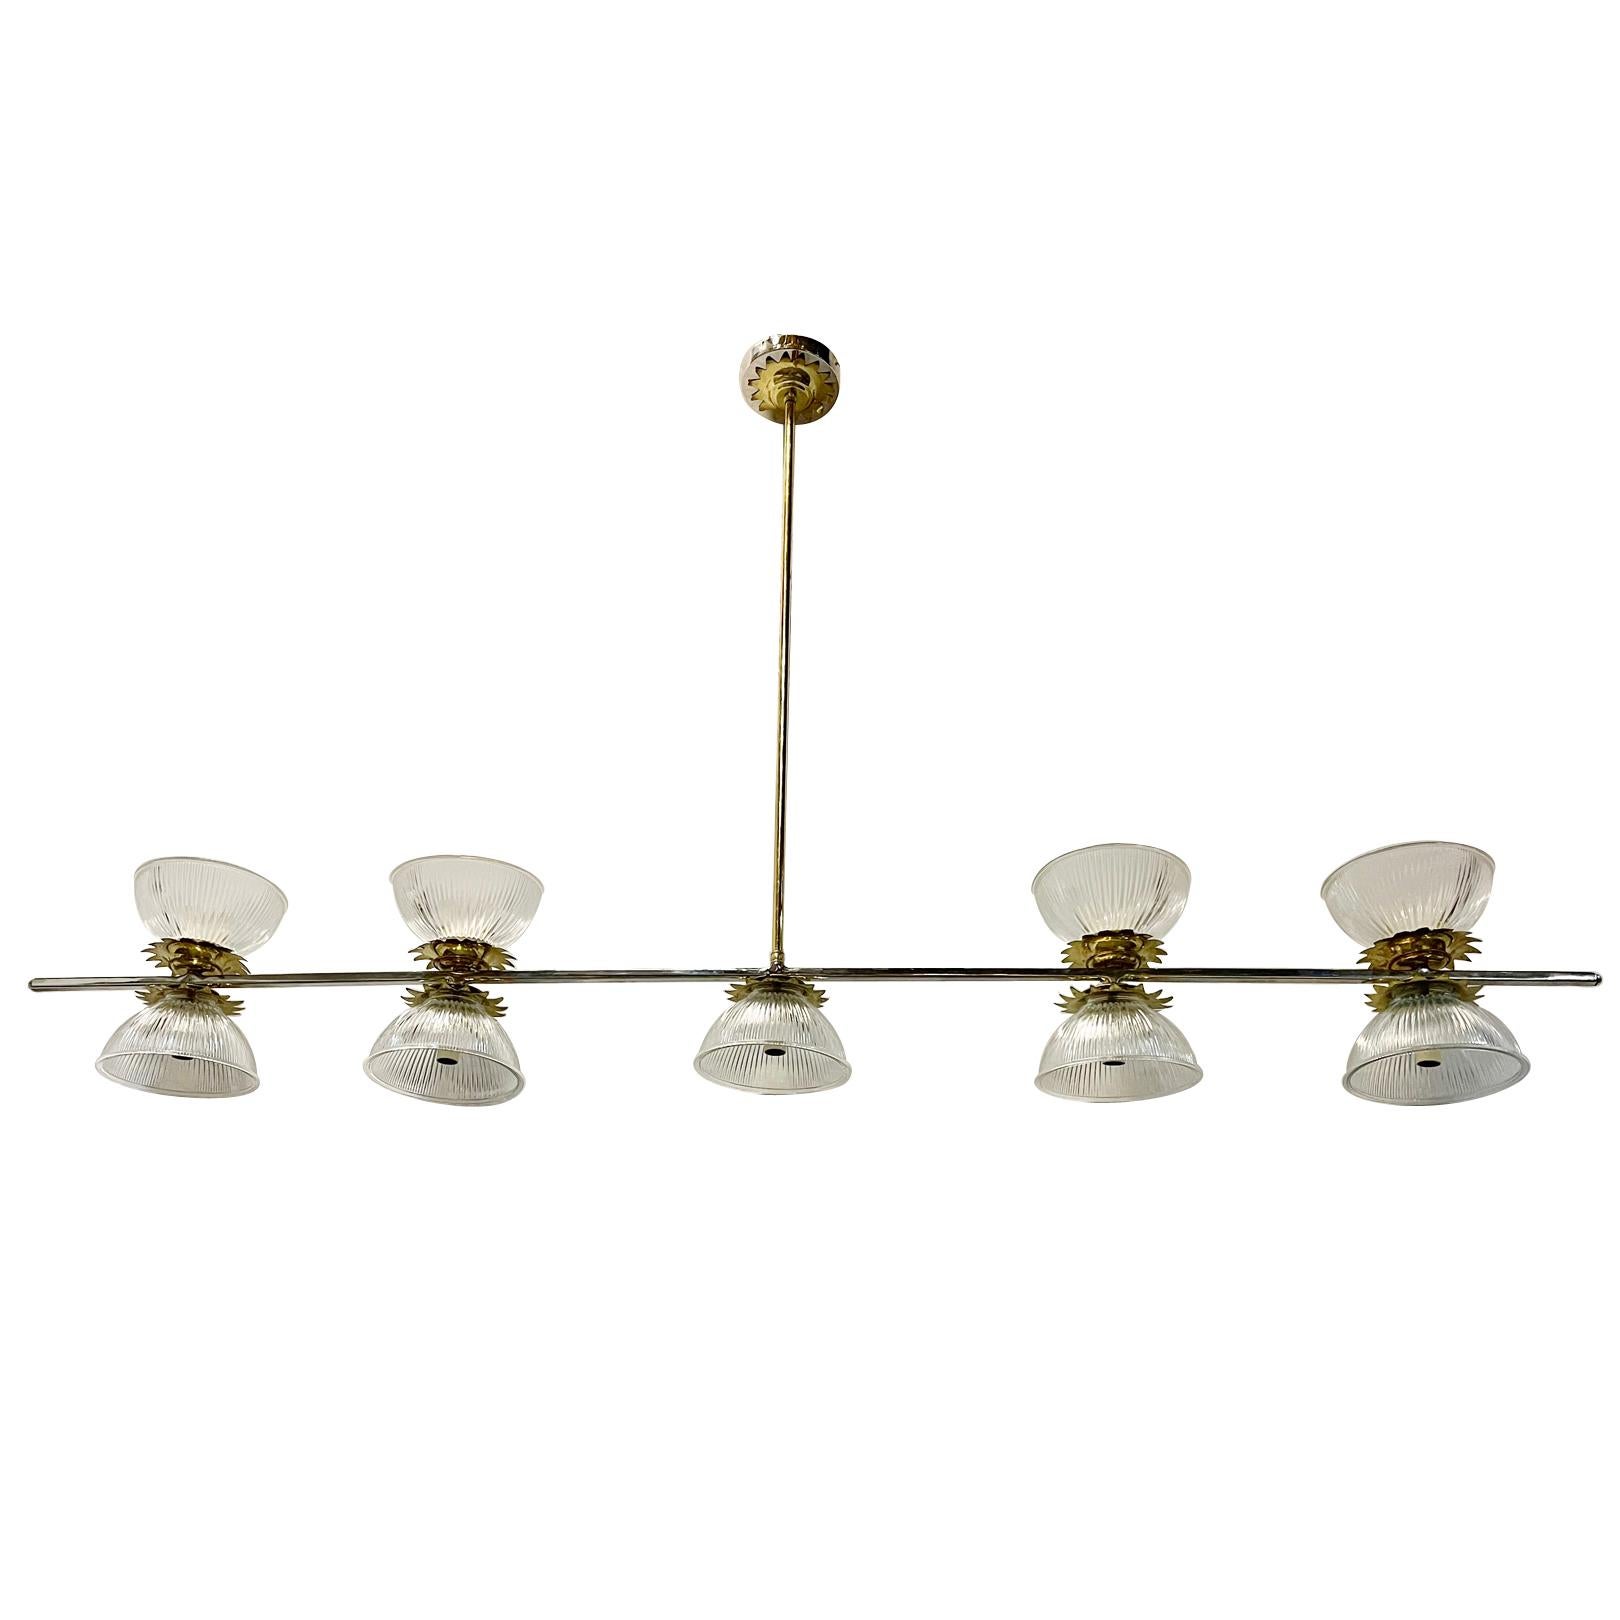 A circa 1960's French light fixture with 9 candelabra lights, nickel and bronze finish.

Measurements:
Height: 38.5